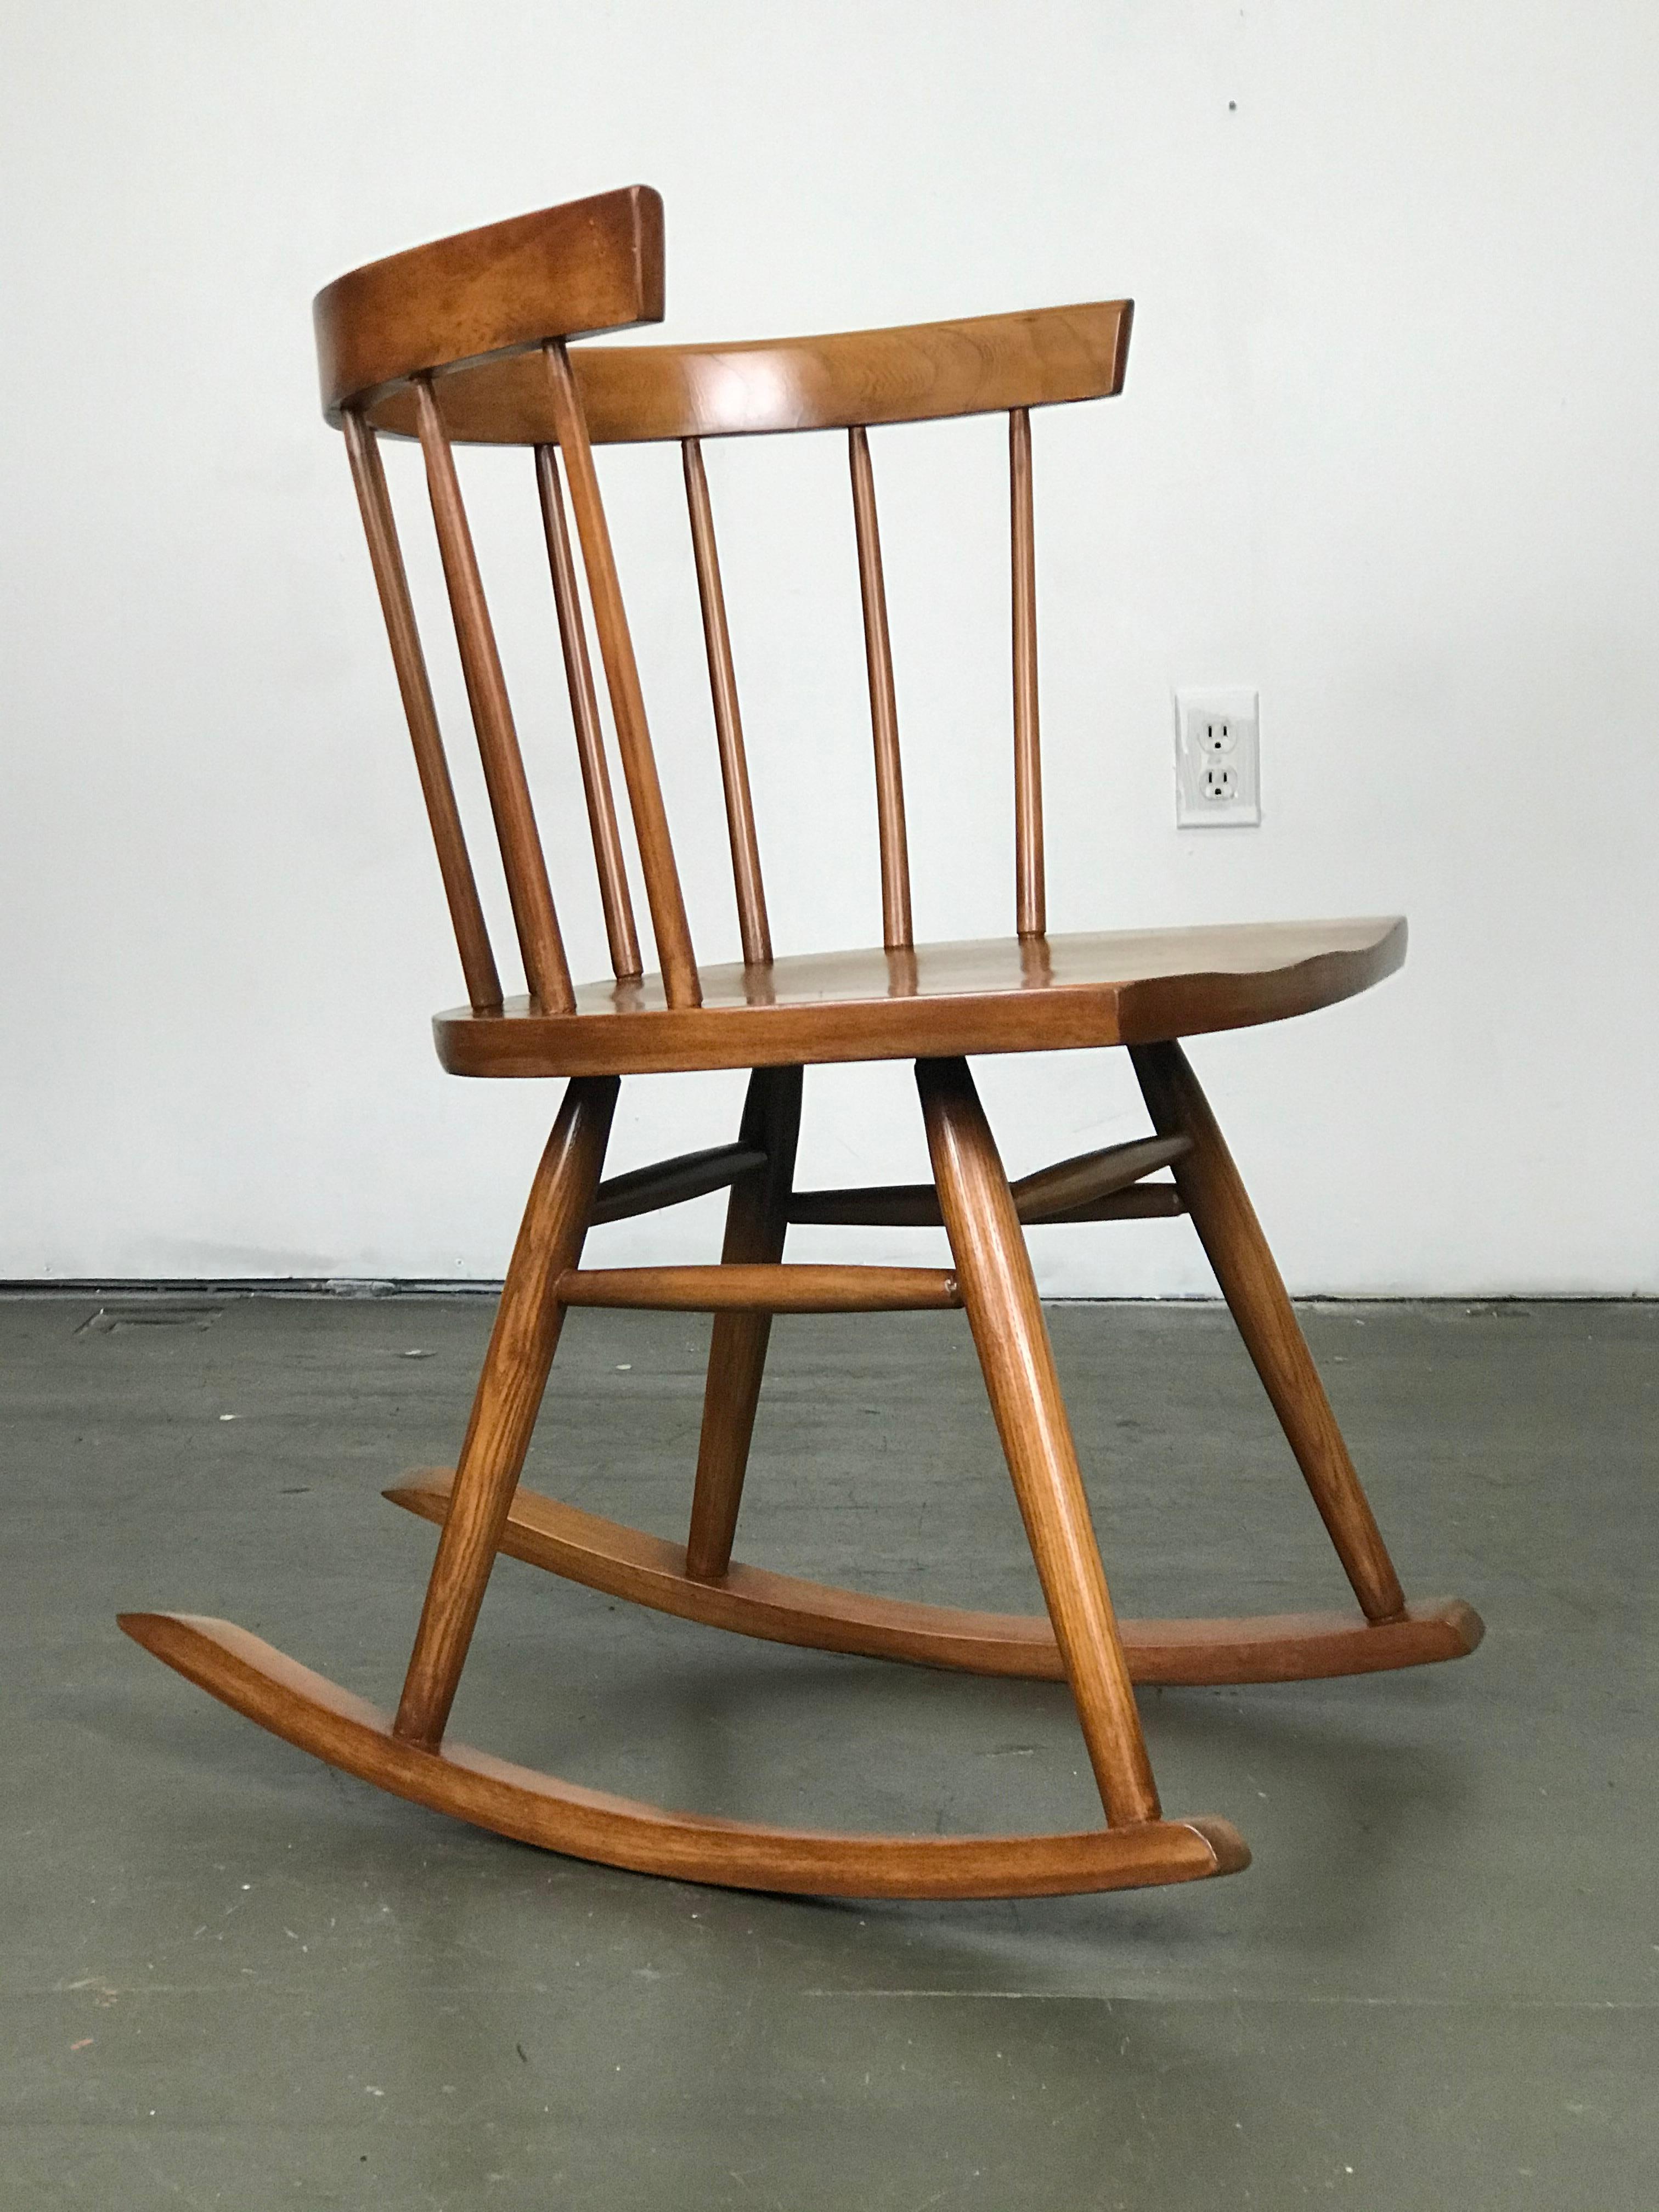 Minimalist Windsor George Nakashima style rocker by Lucian Ercolani for Ercol Furniture of England, circa 1950s. This has been recently refinished yet used since refinishing, and shows some very minor wear. Studio lighting brightens the color. It's